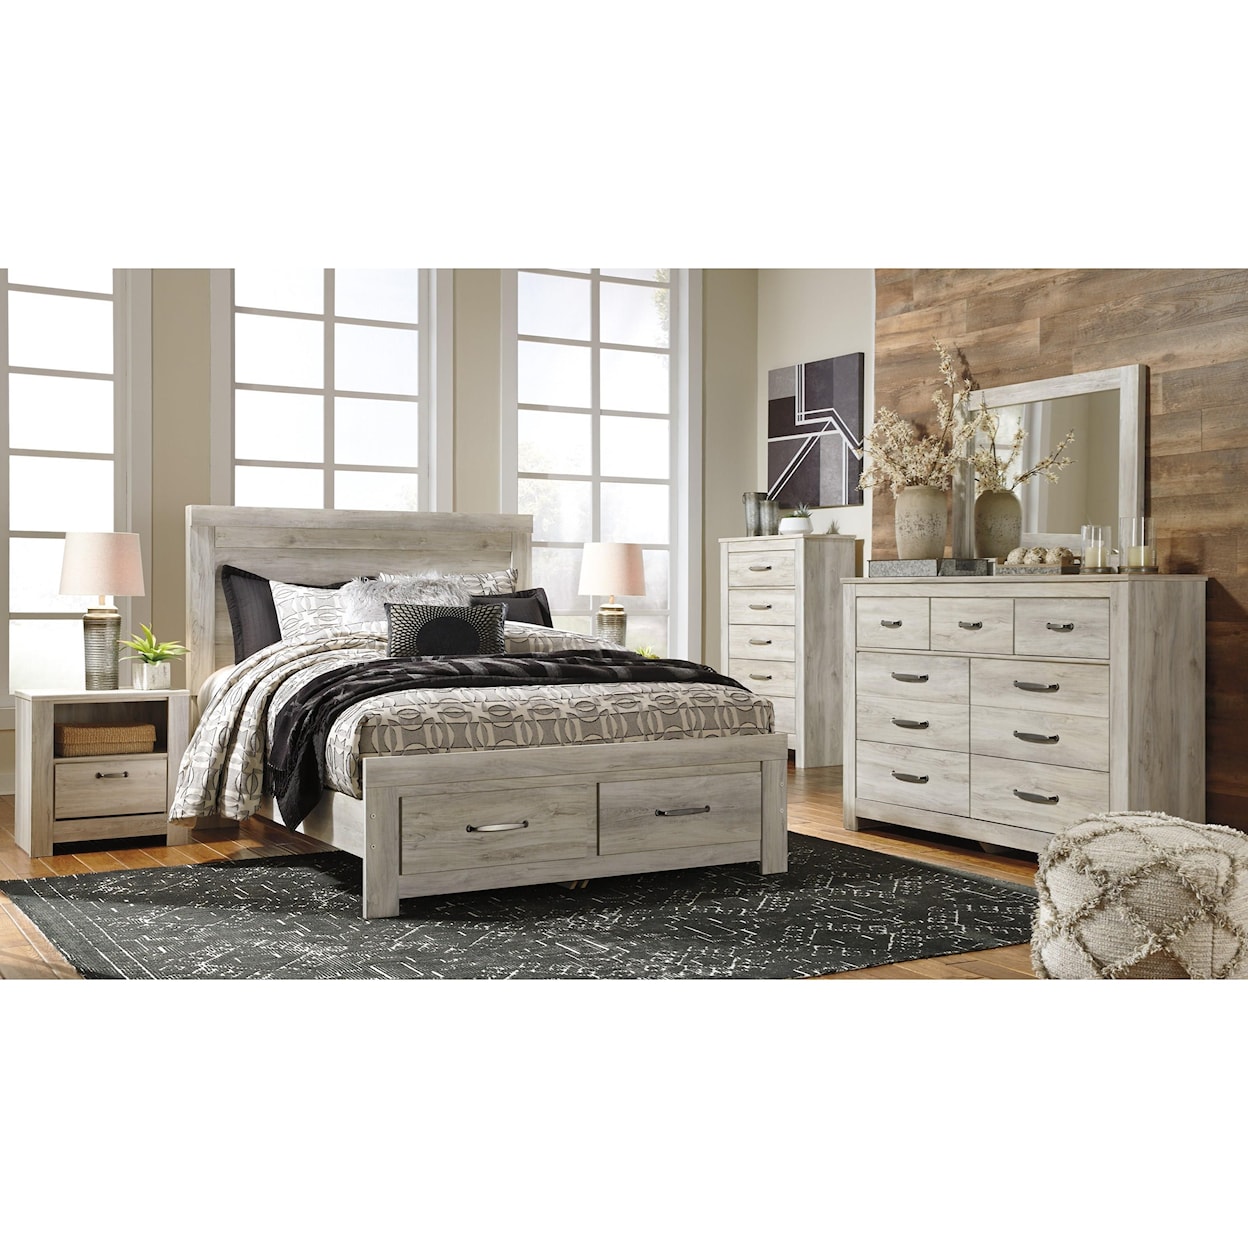 Signature Design by Ashley Bellaby 6pc Queen Bedroom Group